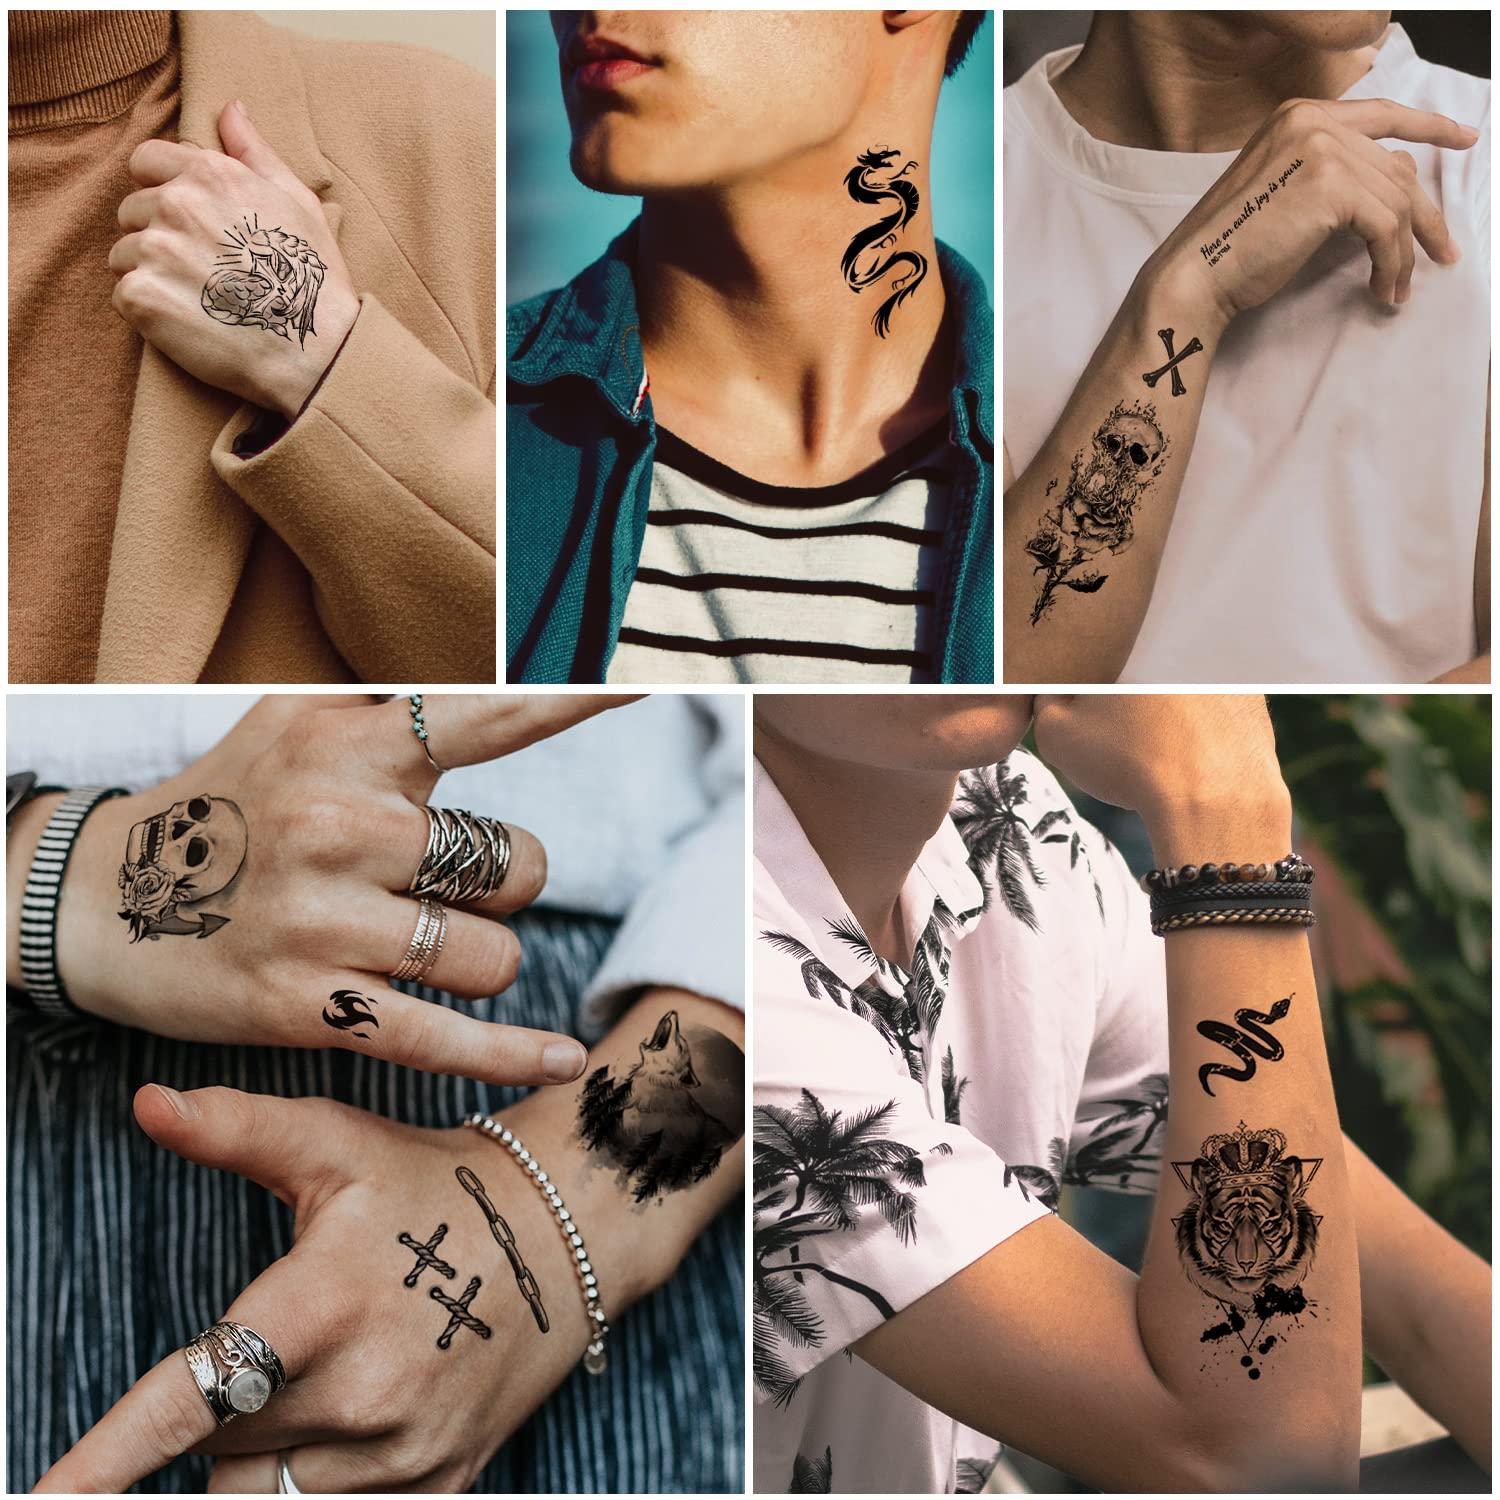 your sign to get a tattoo ✨ | Gallery posted by ariel 🦥 | Lemon8